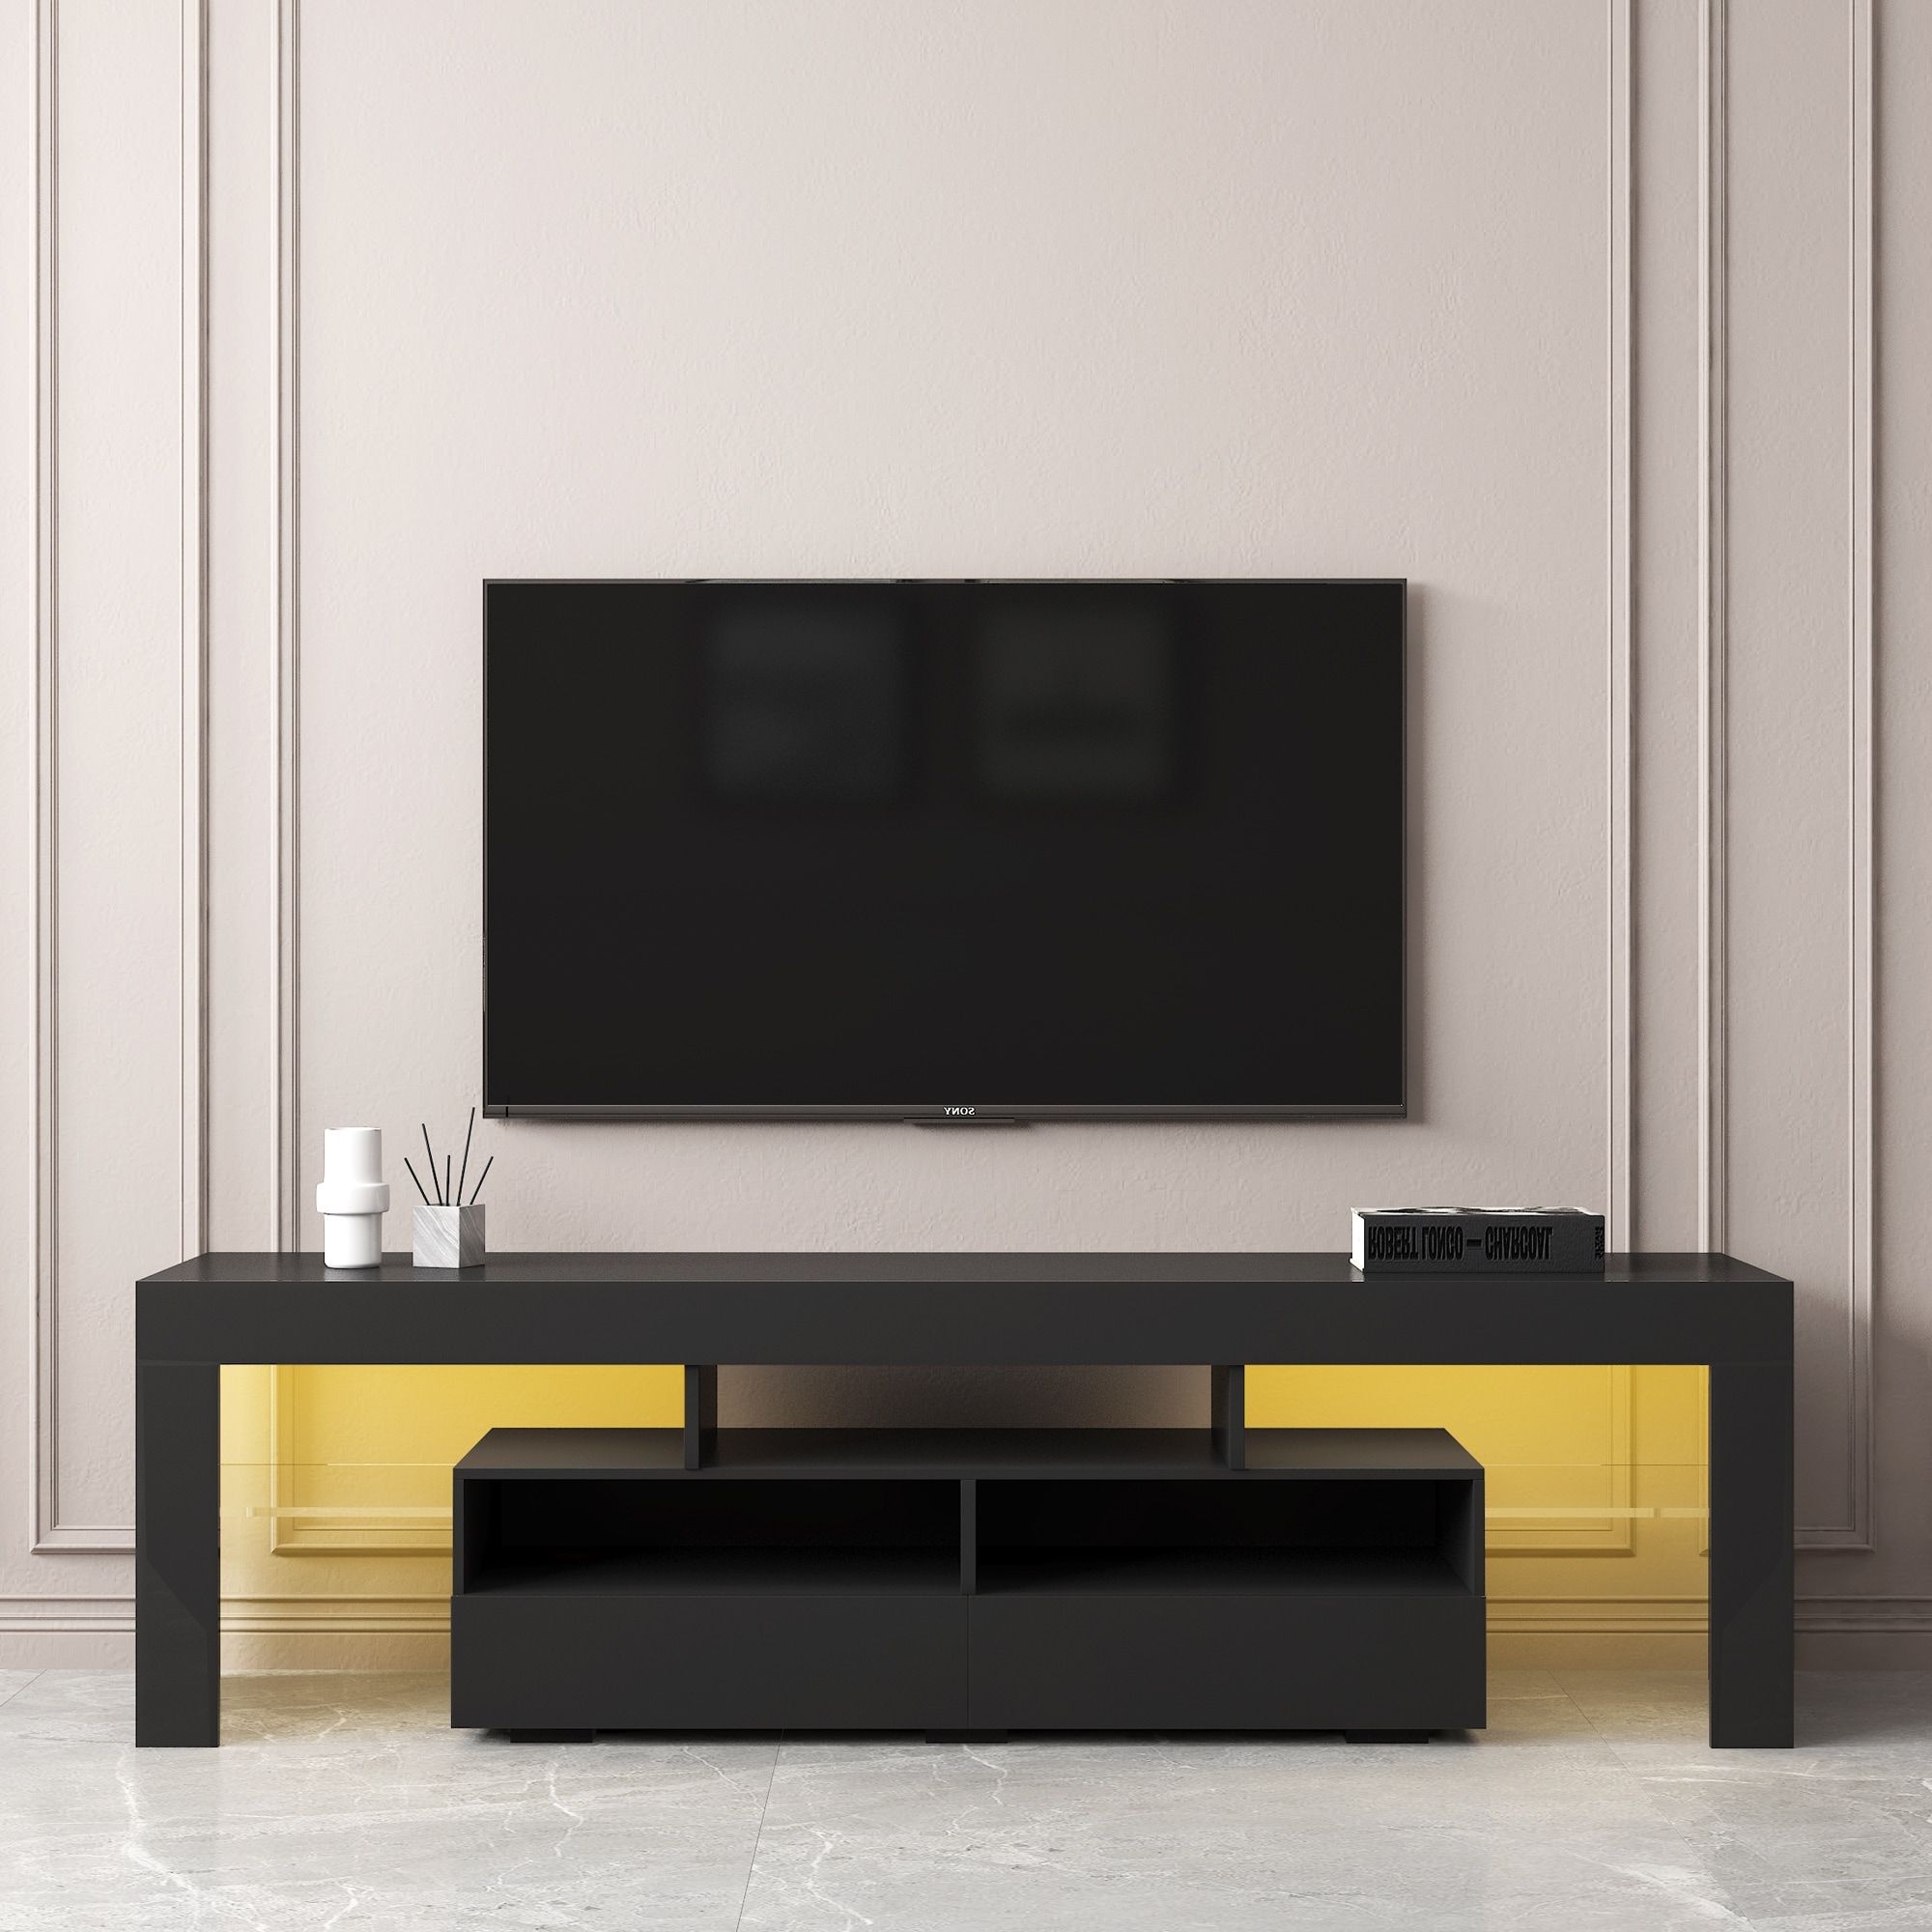 63"l Entertainment Center Cabinet Rgb Led Lights Tv Stand – Bed Bath &  Beyond – 37363398 Pertaining To Rgb Entertainment Centers Black (View 8 of 20)